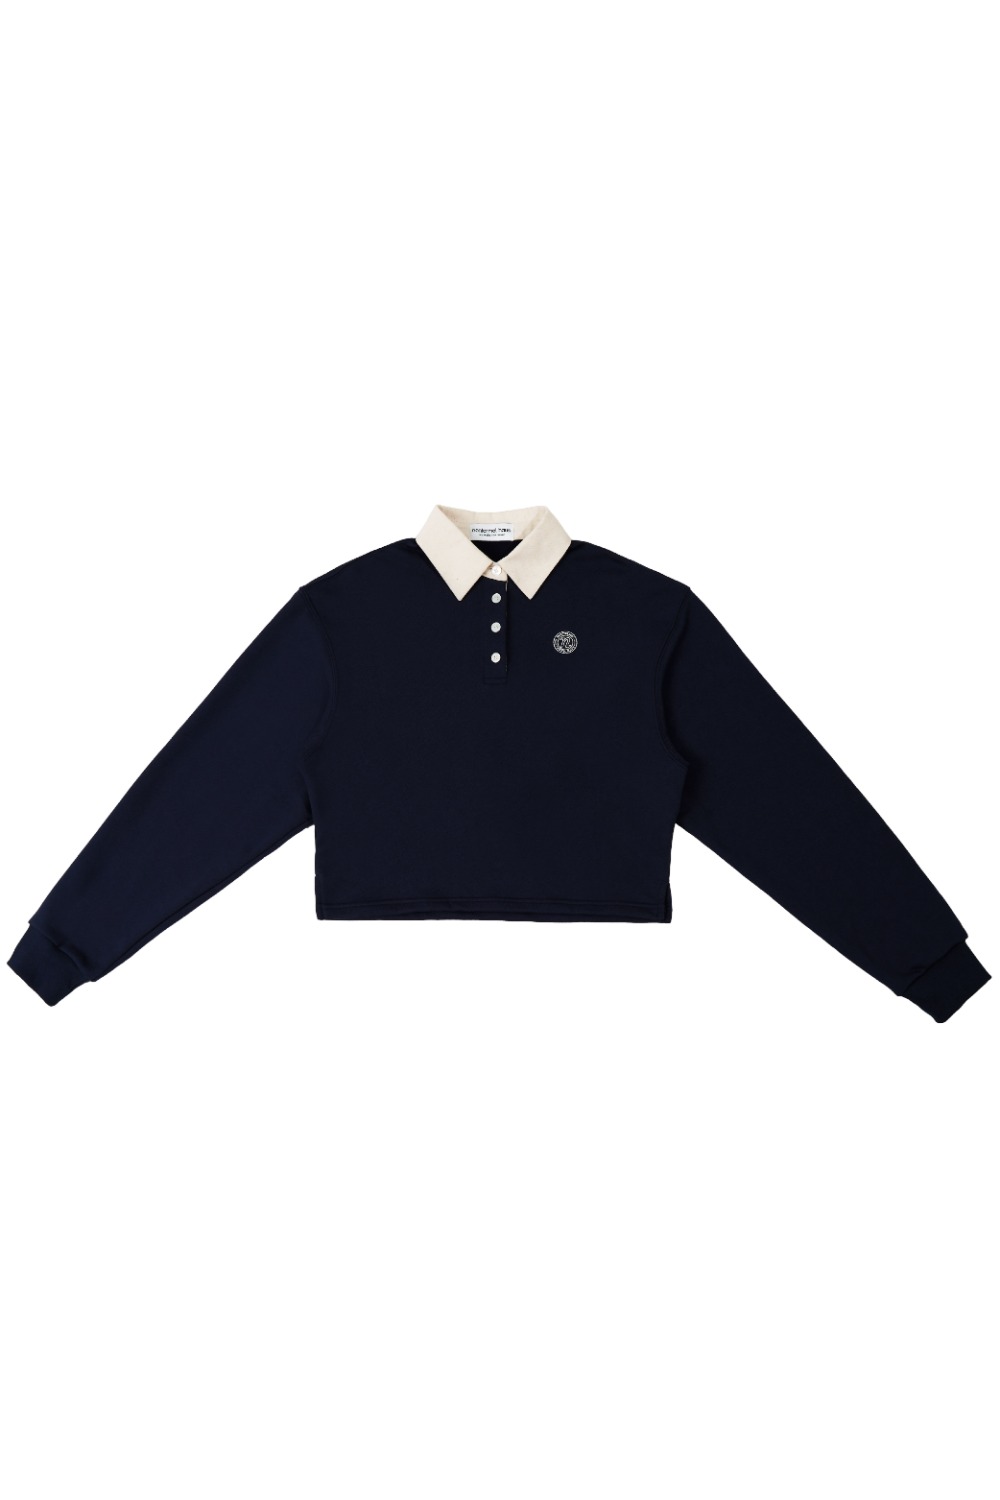 PREPPY RECYCLE RUGBY SWEAT (NAVY) RICHEZ